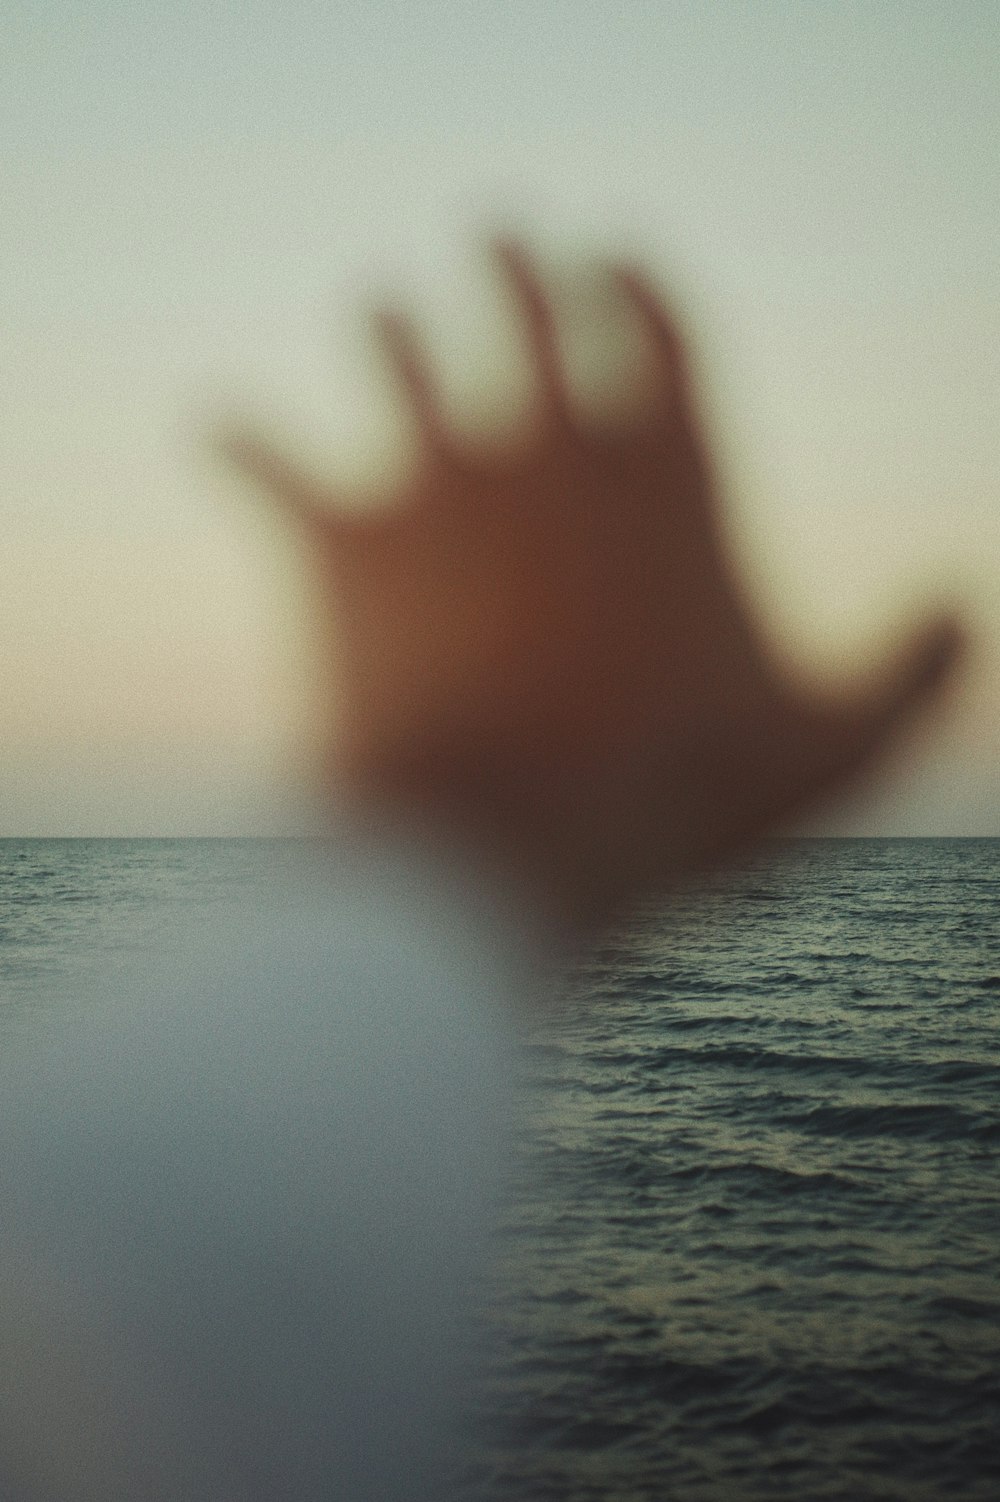 persons hand on body of water during daytime